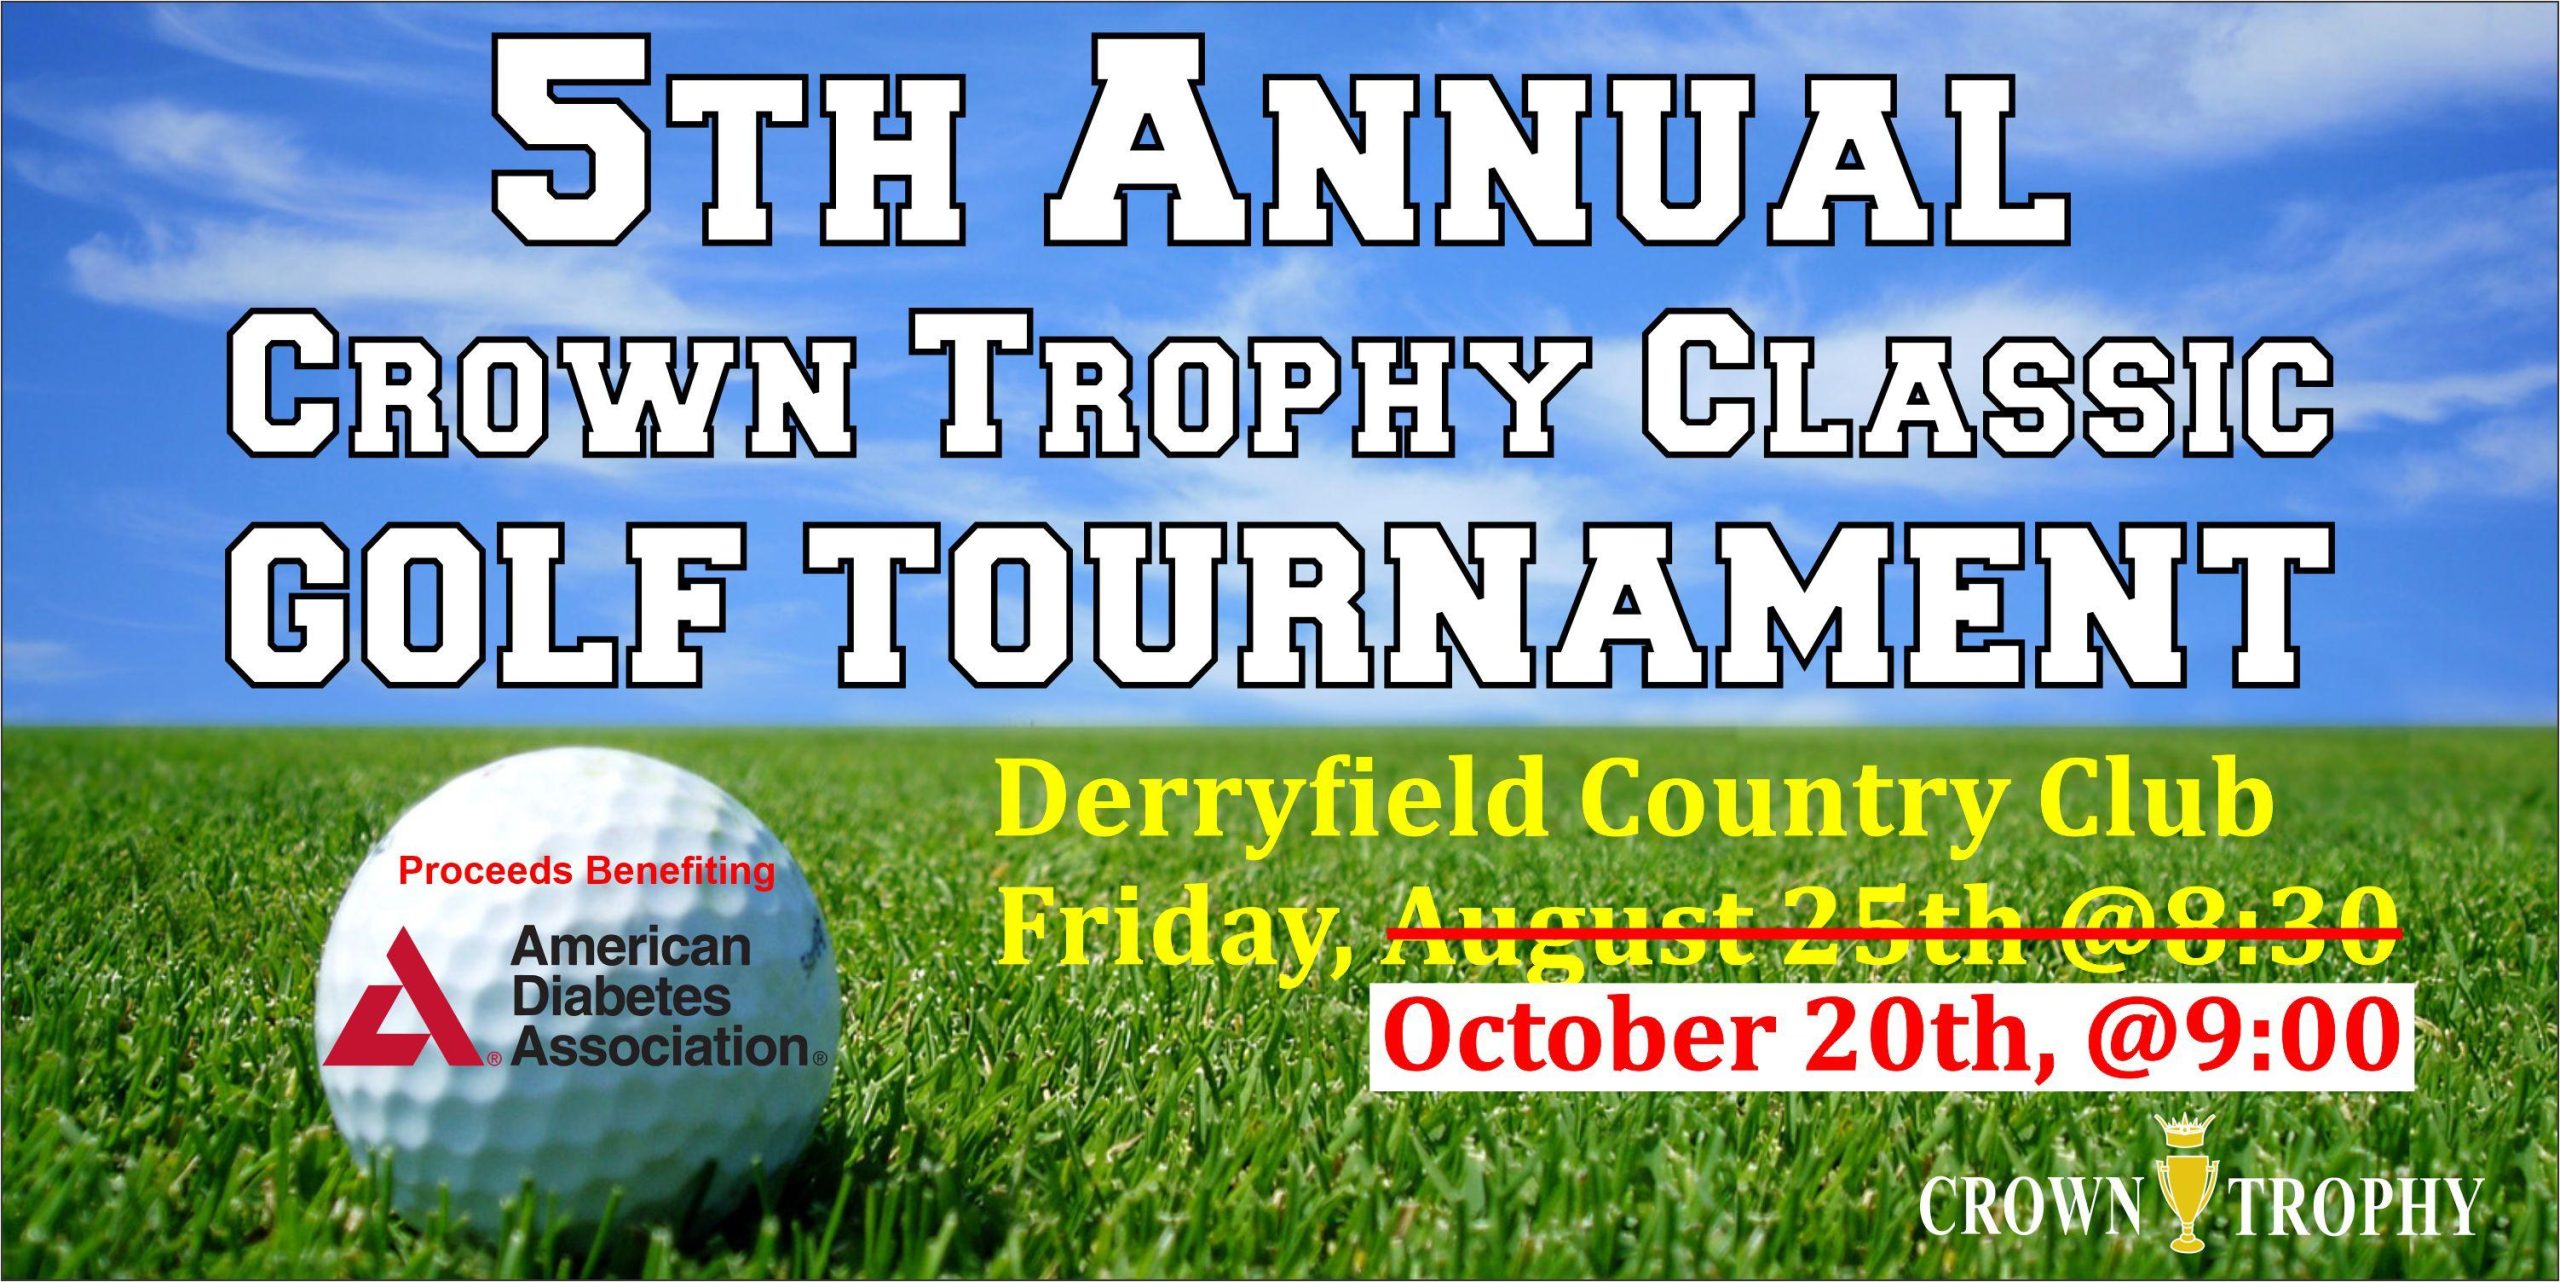 5th Annual Crown Trophy Classic Golf Tournament